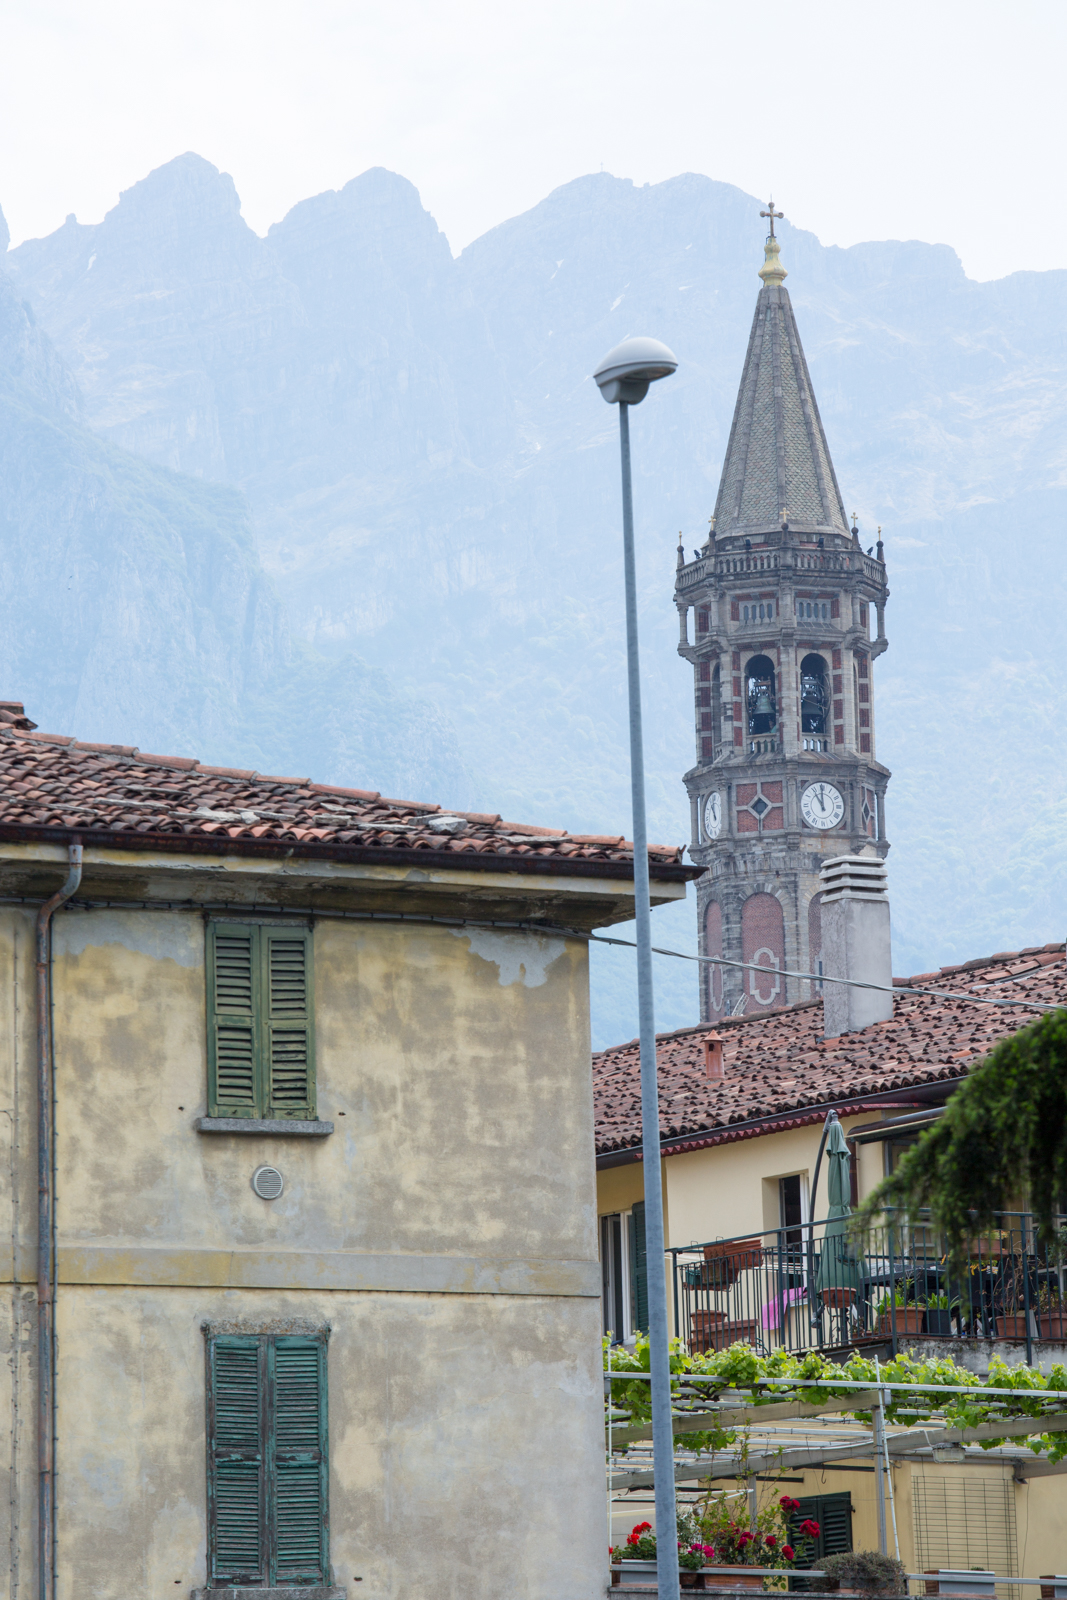 Lecco's Bell Tower and Monte Resegone